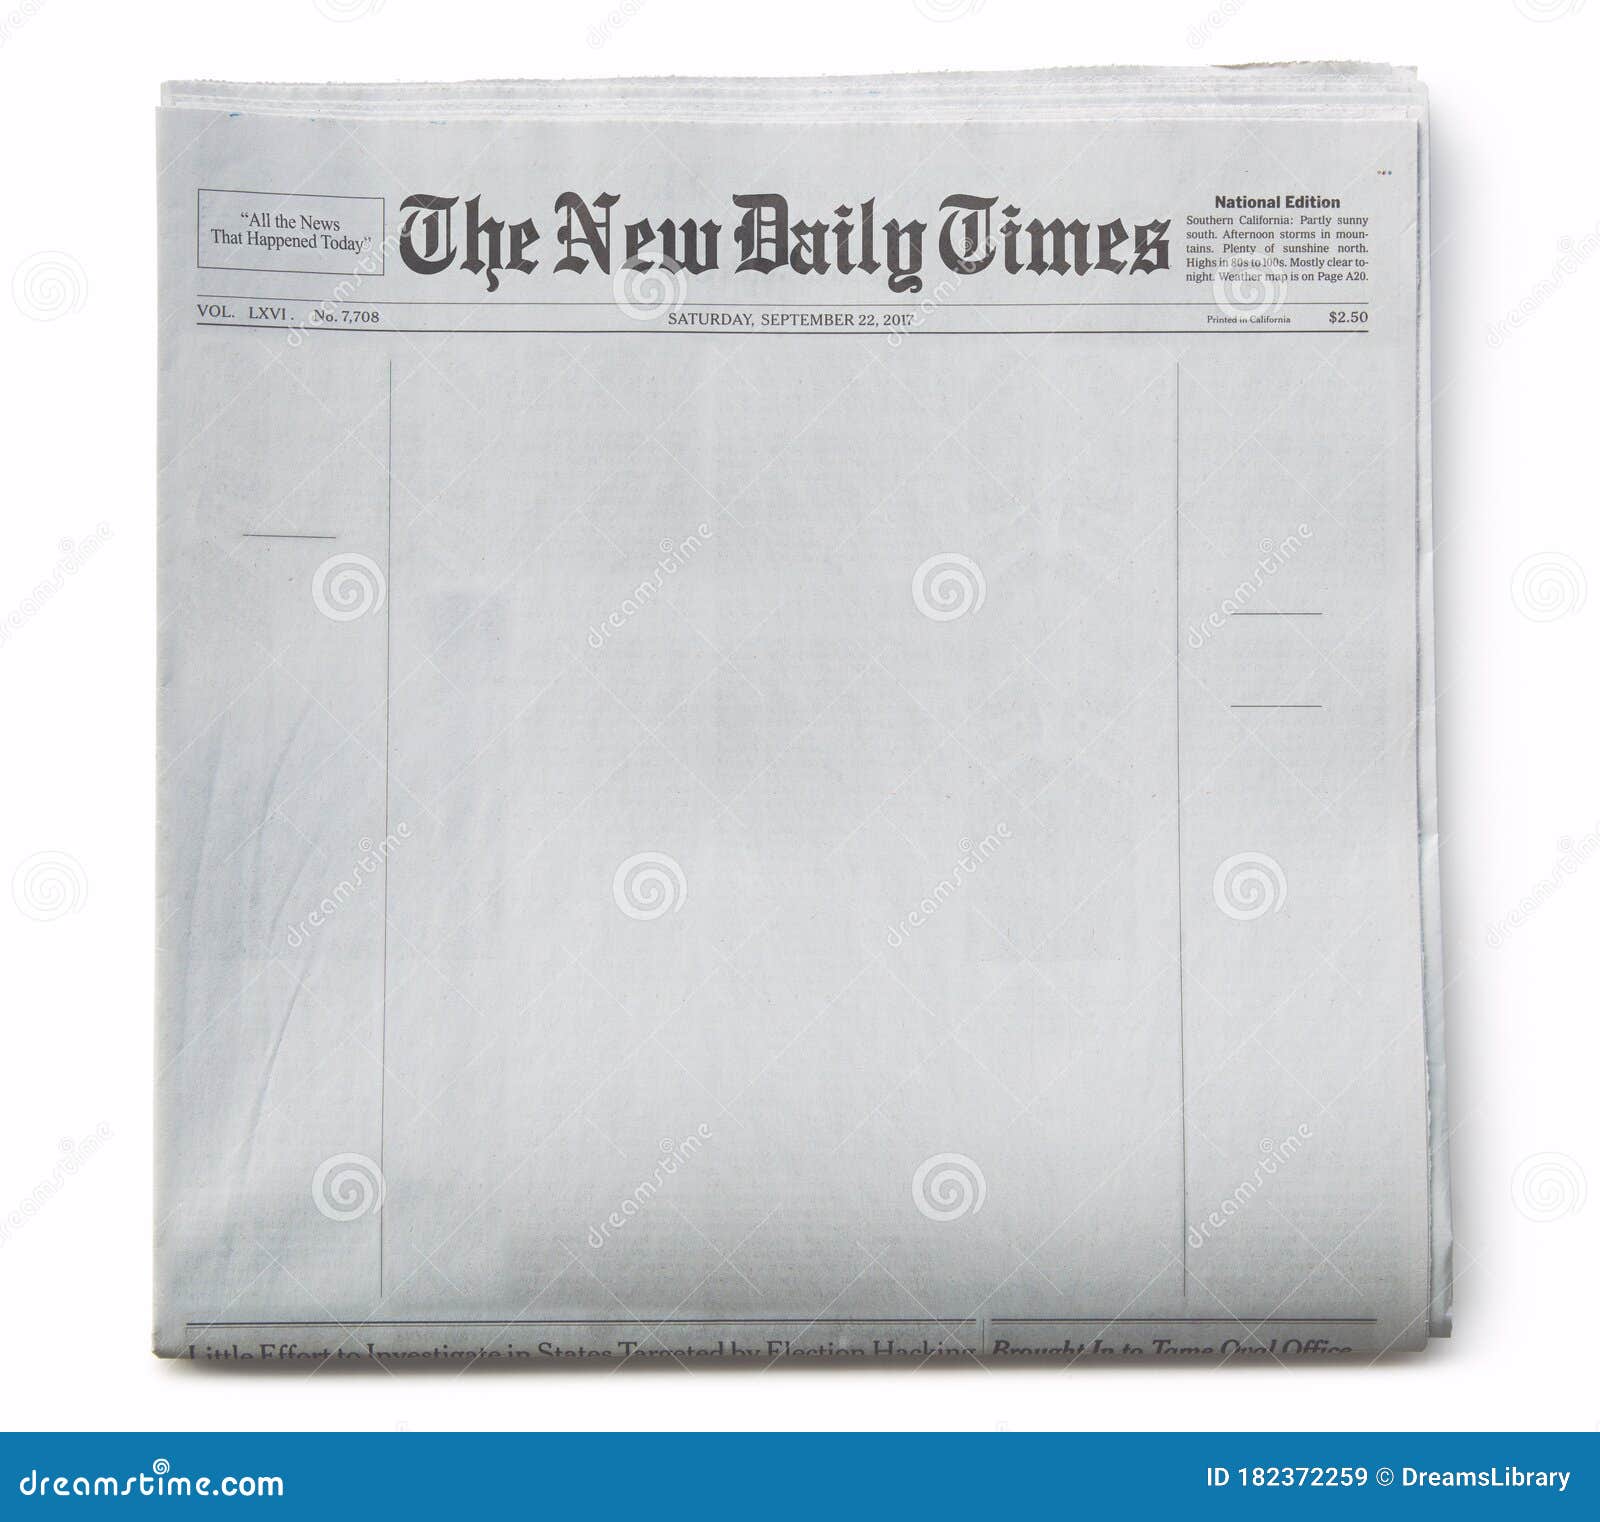 fake-newspaper-front-page-blank-royalty-free-stock-photo-cartoondealer-182372259